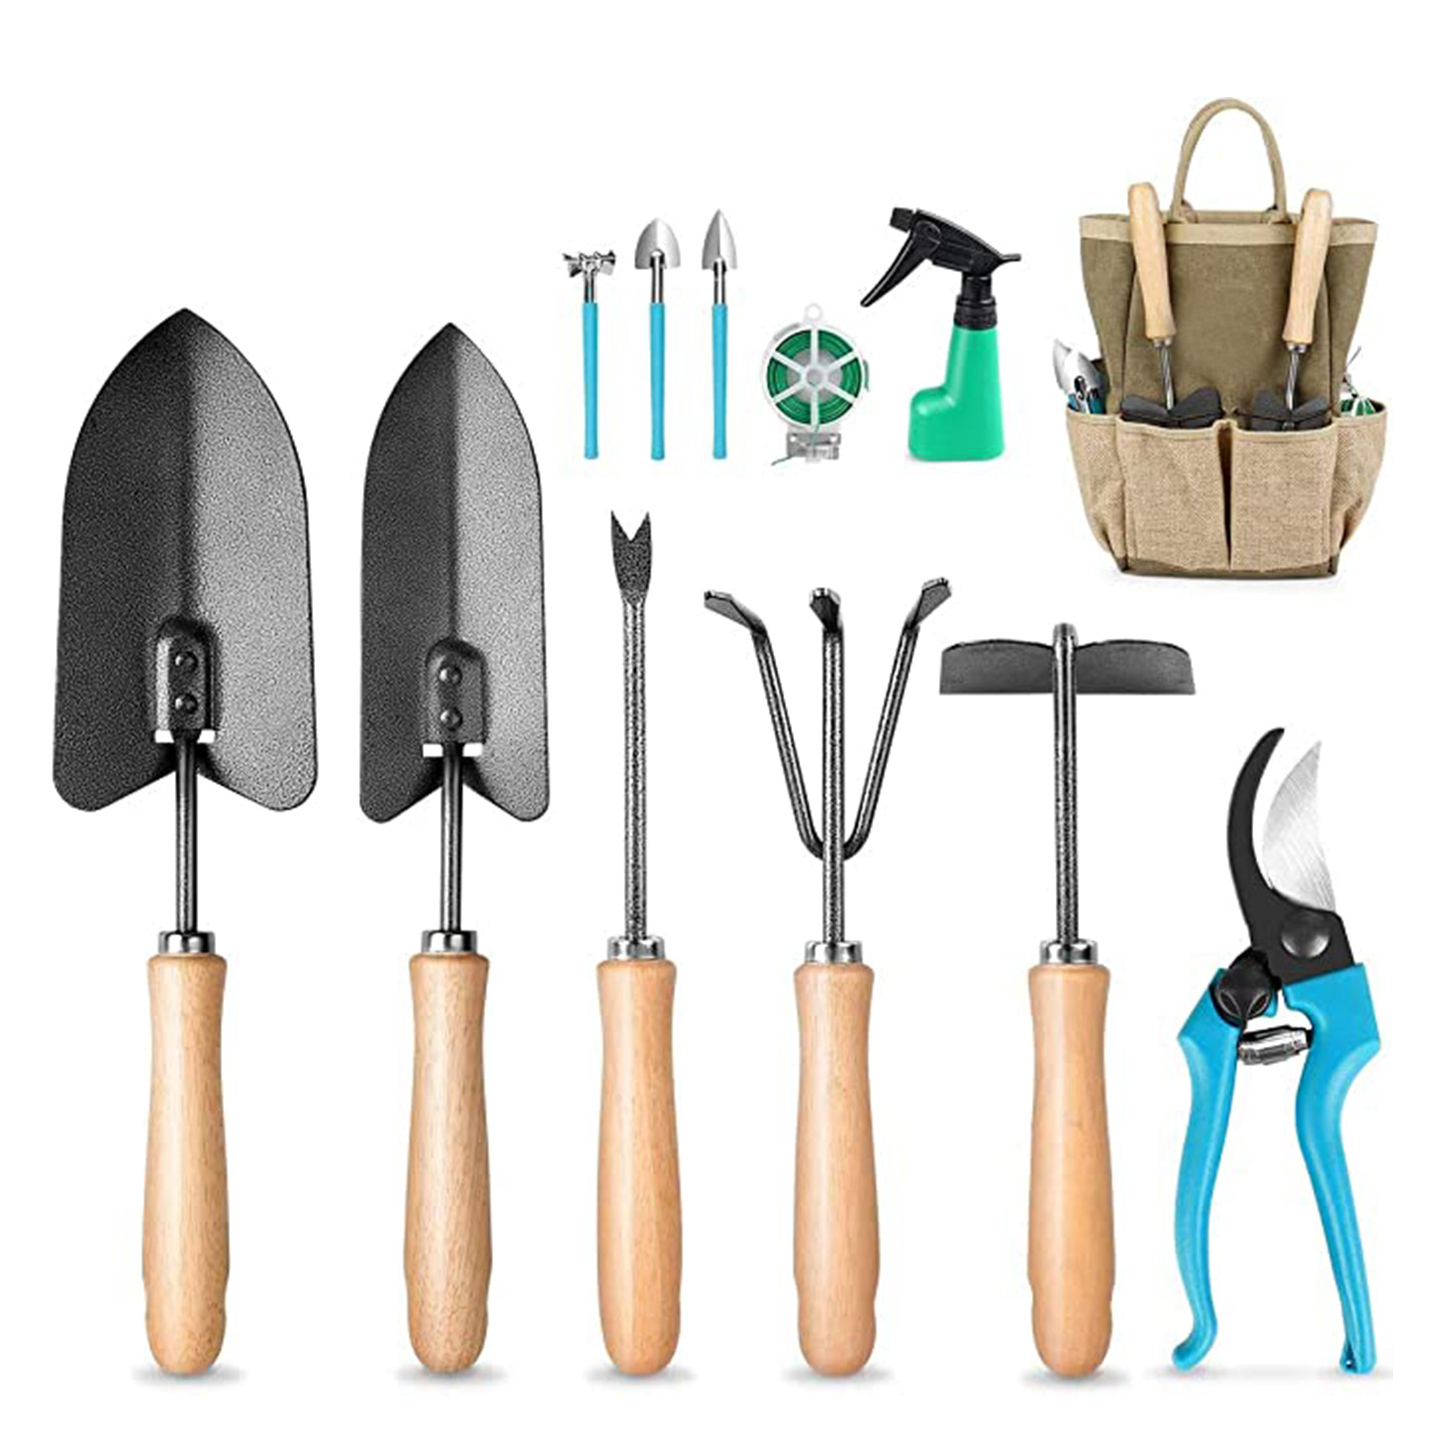 China Factory for Womens Gardening Set - 12PCS Garden Tools with Cloth Bag – MACHINERY TOOLS